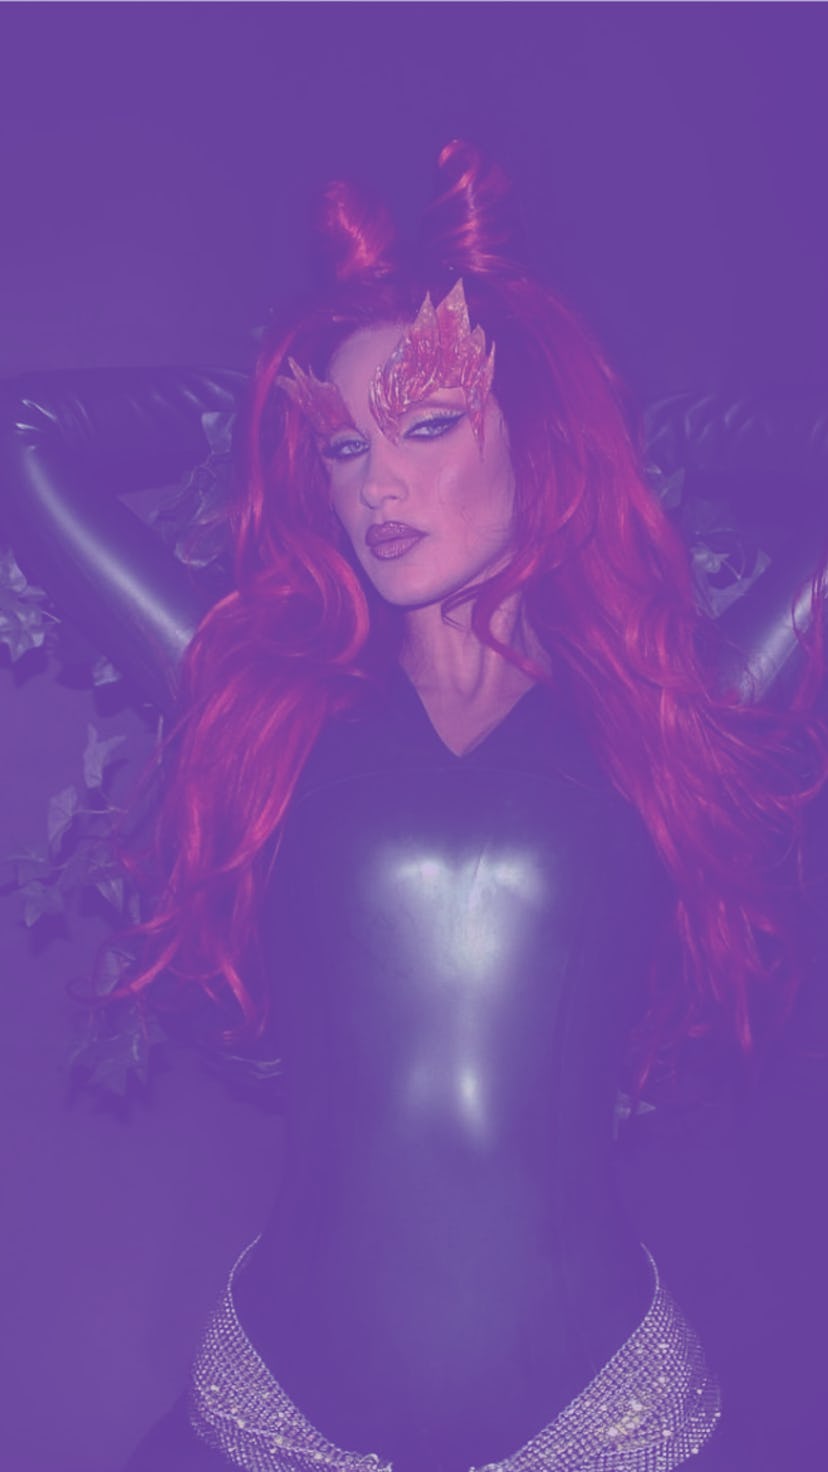 Model Bella Hadid dressed up as supervillain Poison Ivy inspired by the Uma Thurman costume from Bat...